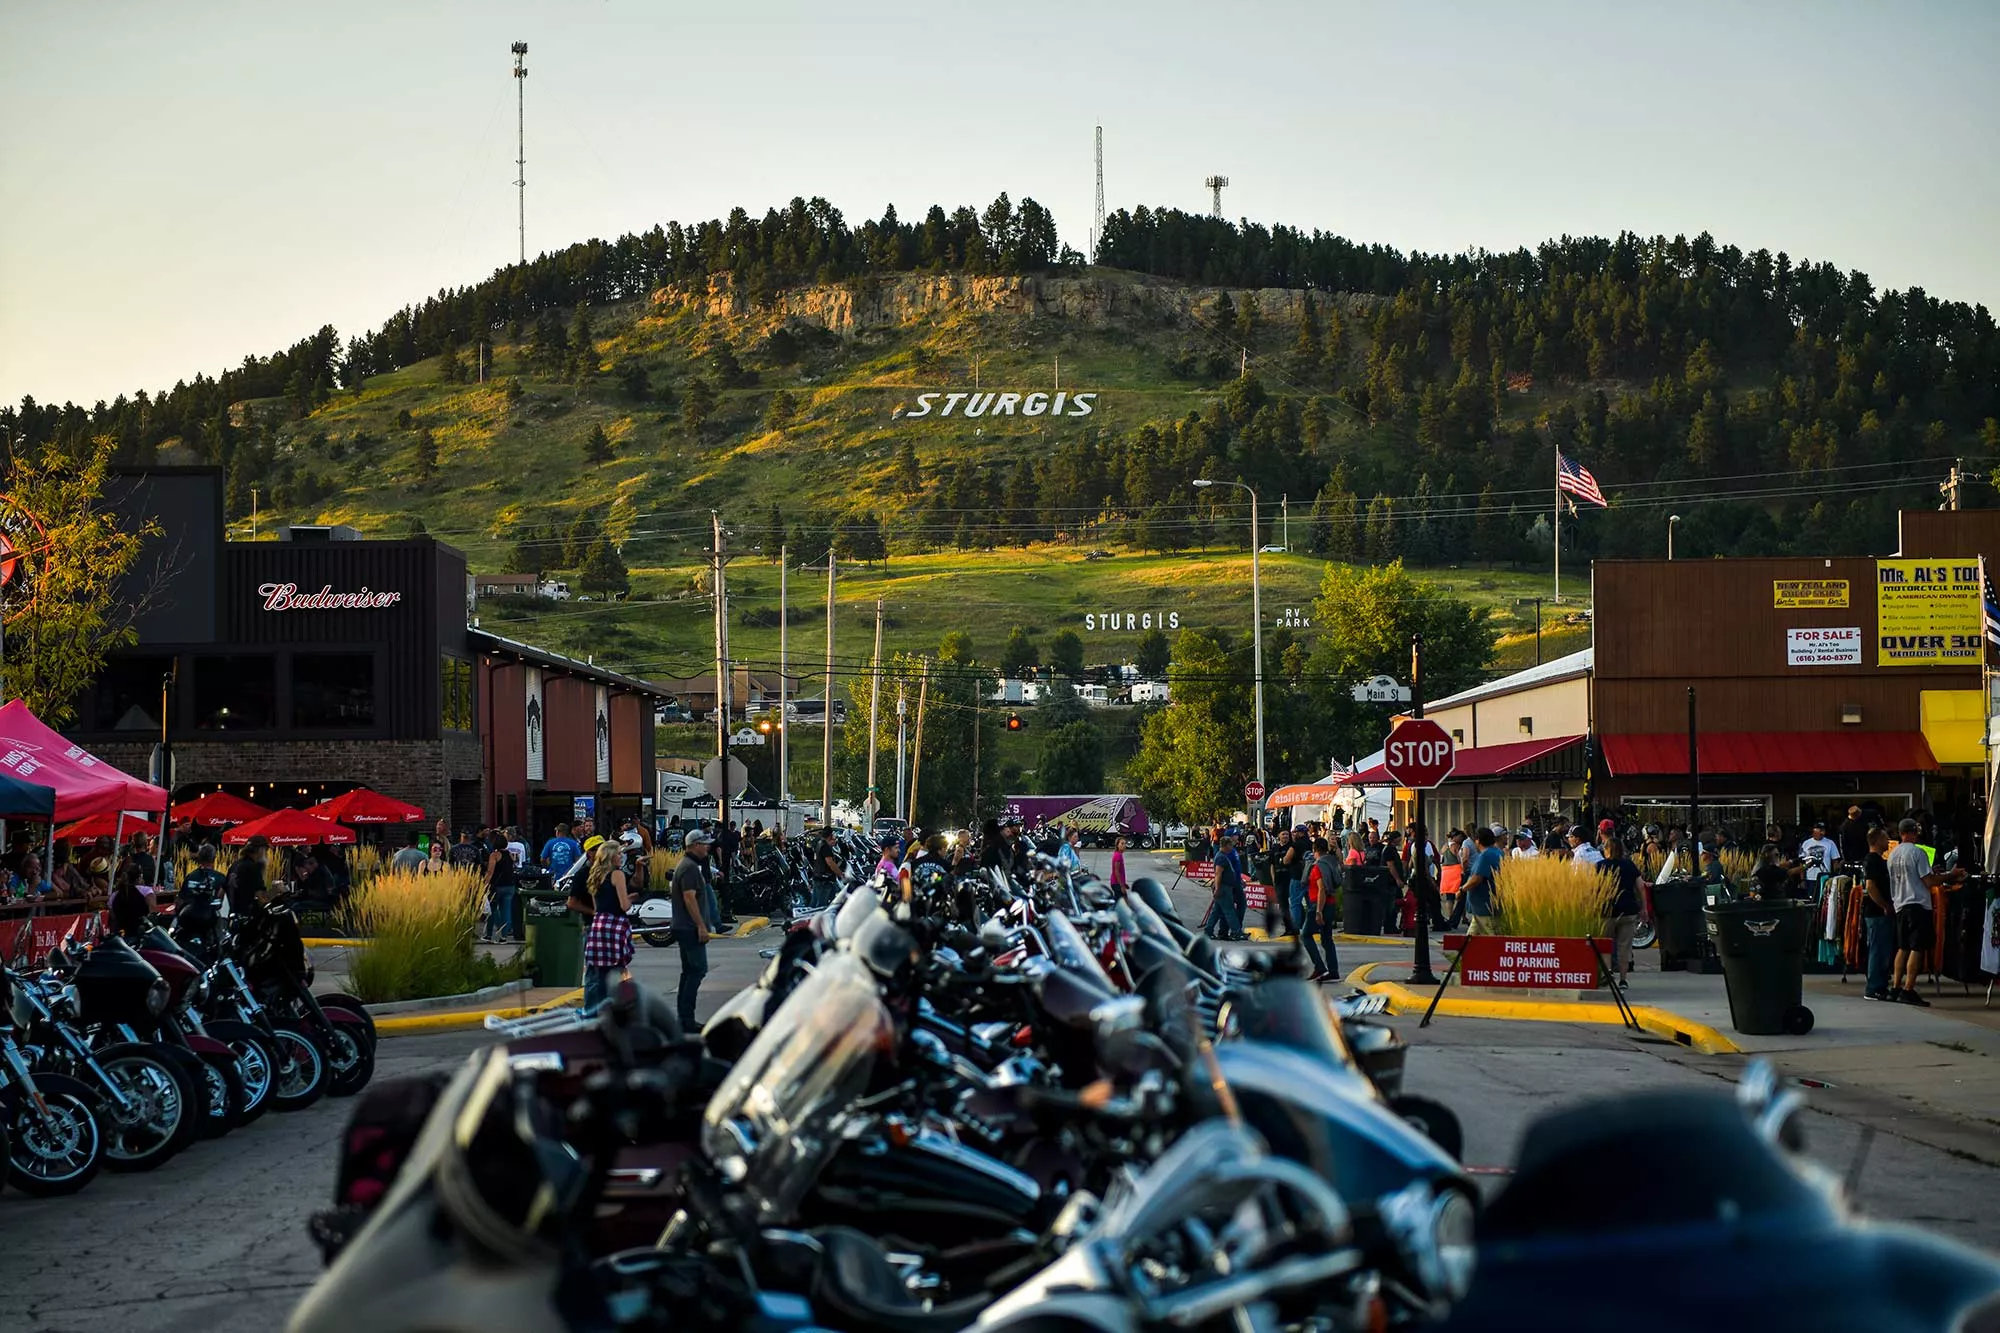 Motorcycles sit parked in downtown Sturgis.